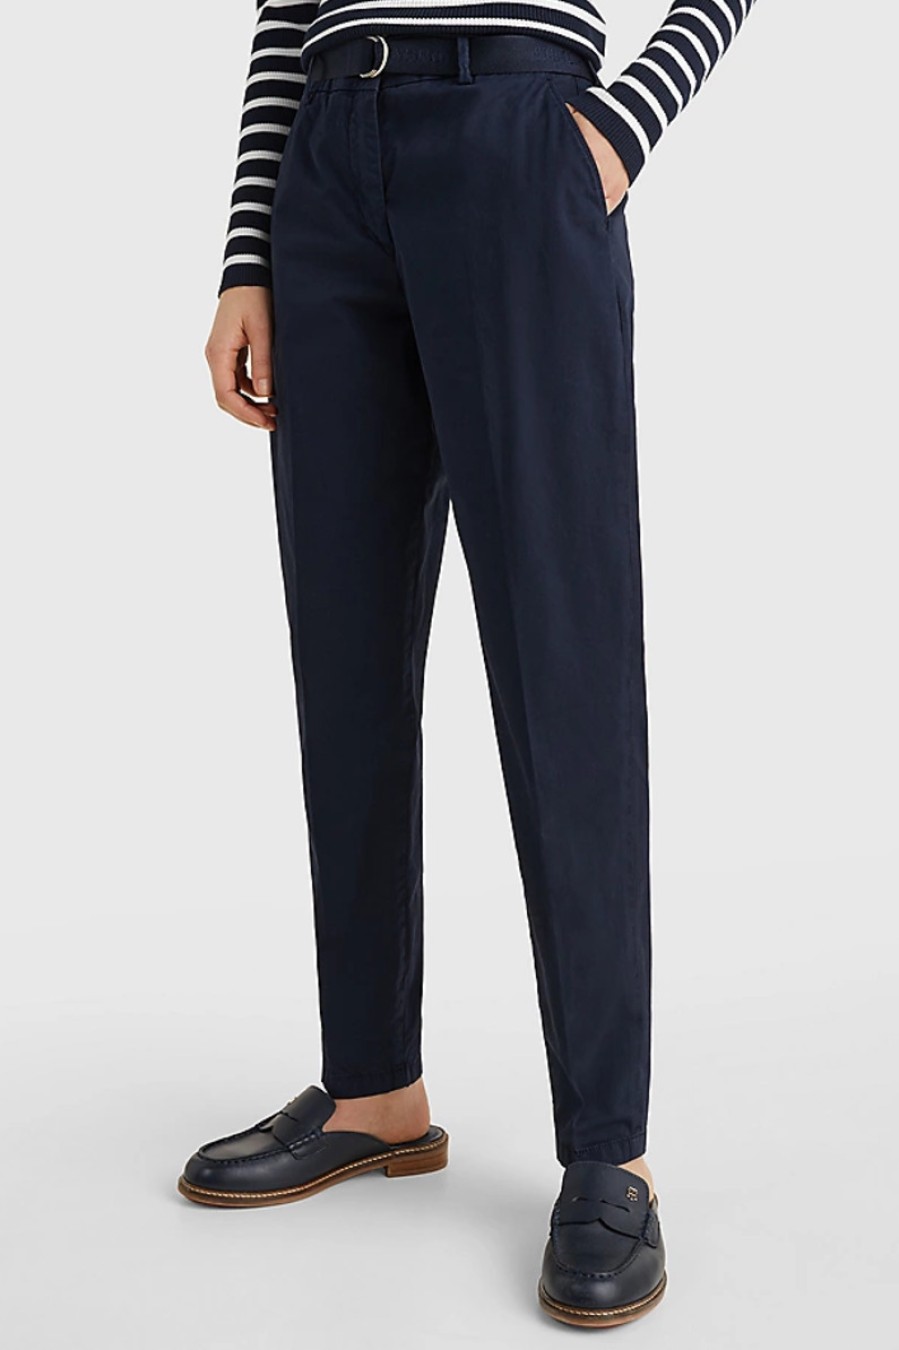 TOMMY HILFIGER ΠΑΝΤΕΛΟΝΙ ΓΥΝΑΙΚΕΙΟ CO TWILL MICHELLE TAPERED PANT